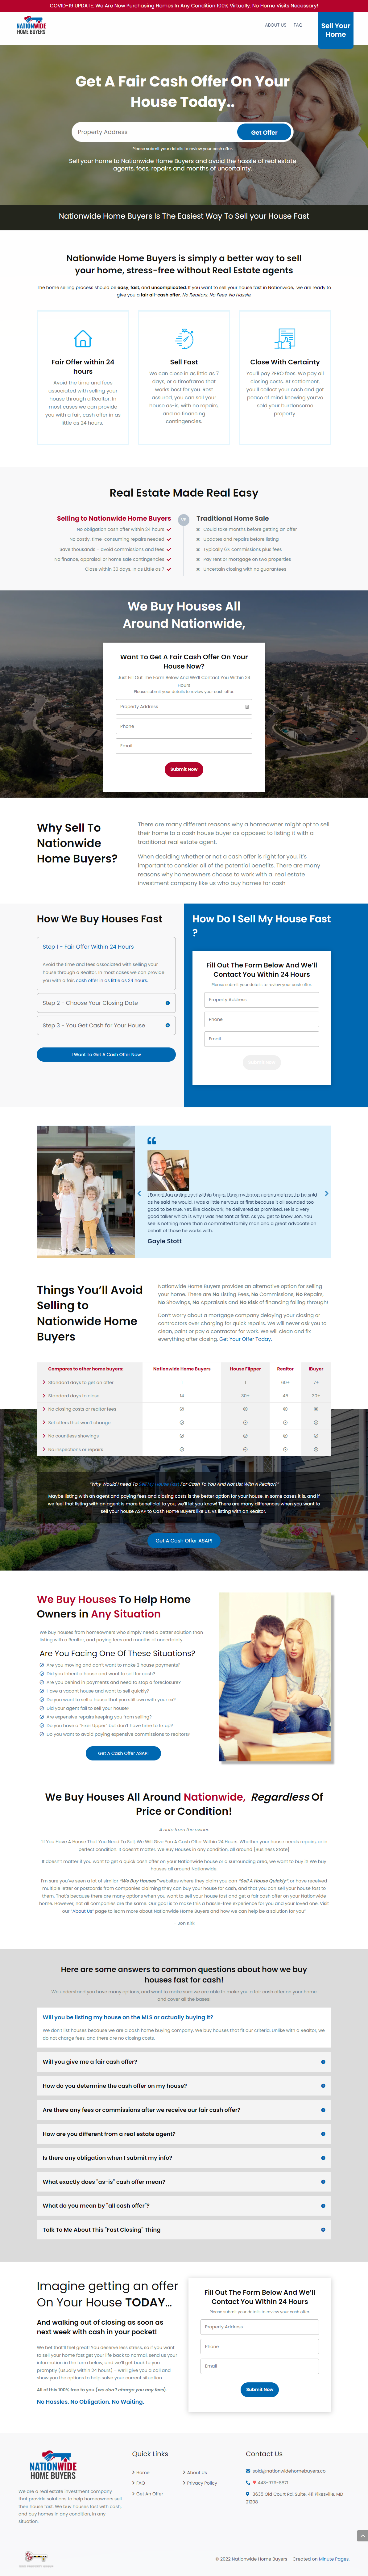 minutepages nationwide homebuyers 